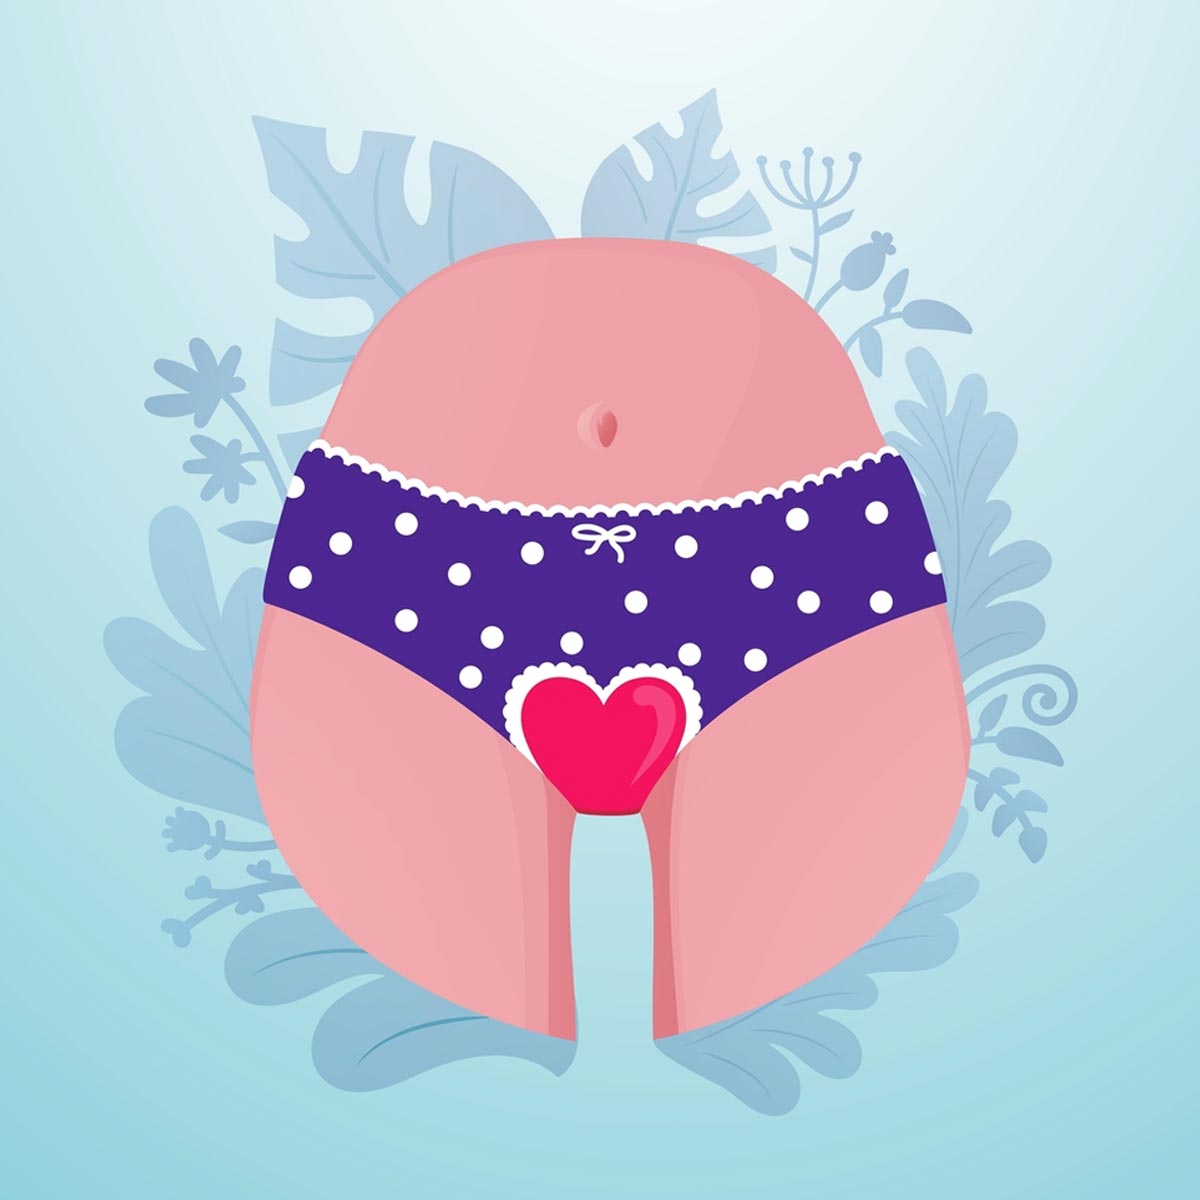 SuperBottoms brings out period underwear for female wellness and